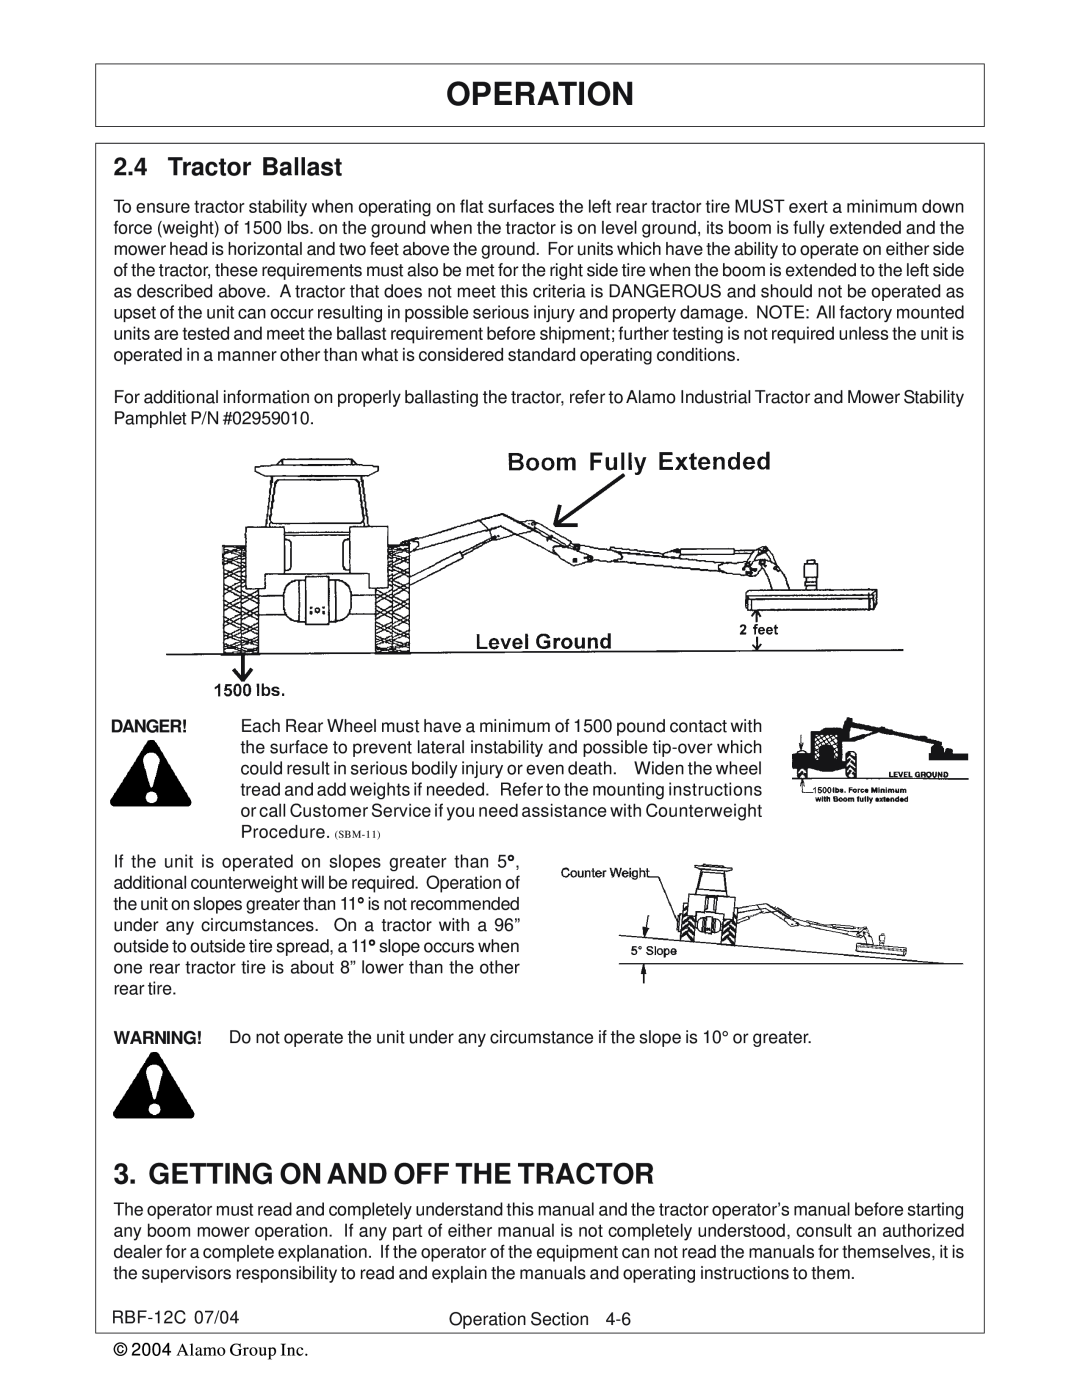 Tiger Products Co., Ltd RBF-12C manual Getting On And Off The Tractor, Operation, Tractor Ballast 